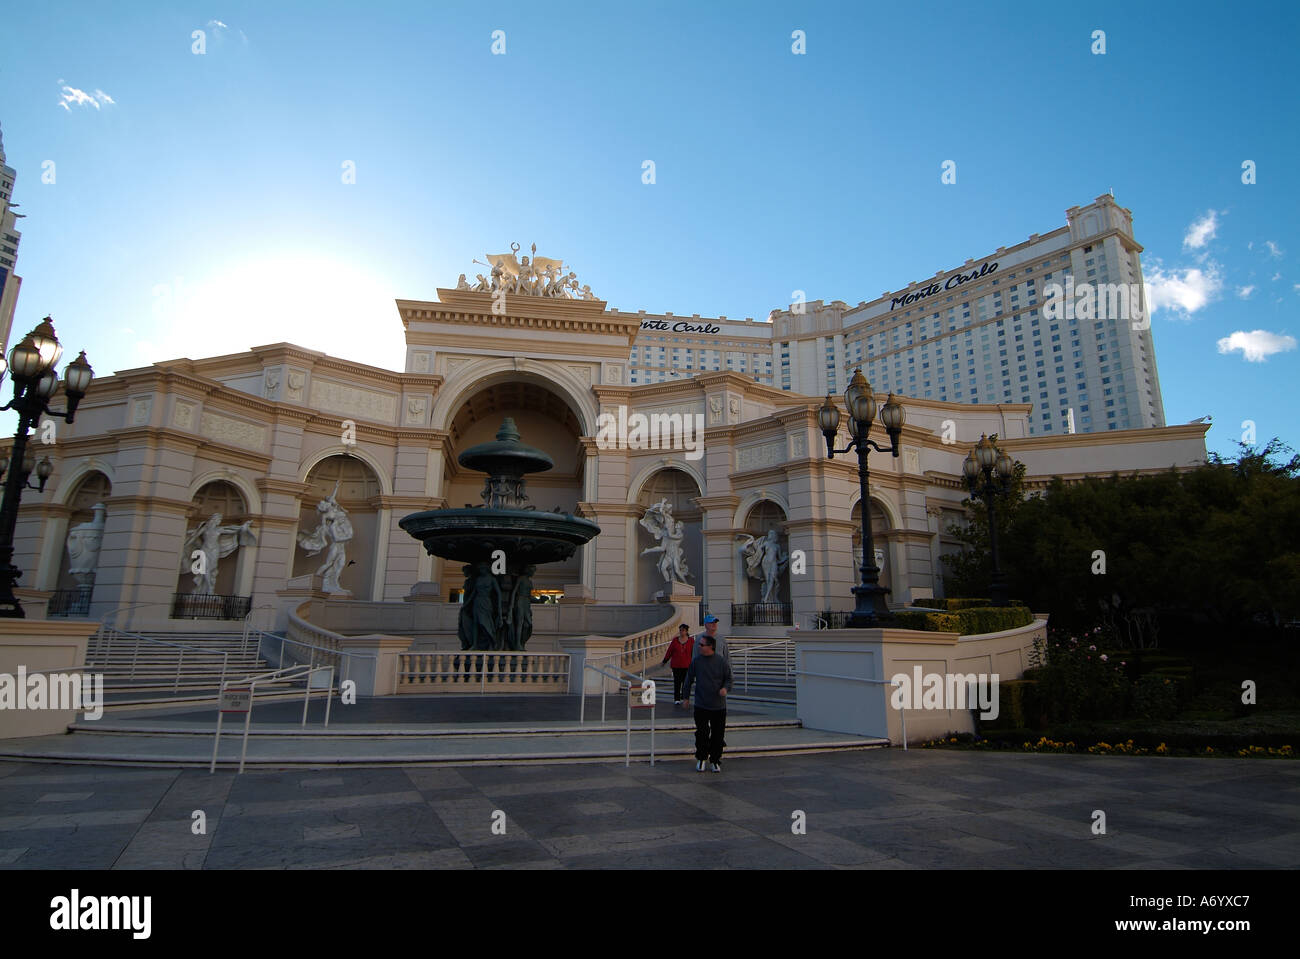 Monte carlo casino and hotel in Las vegas strip during daytime Stock Photo